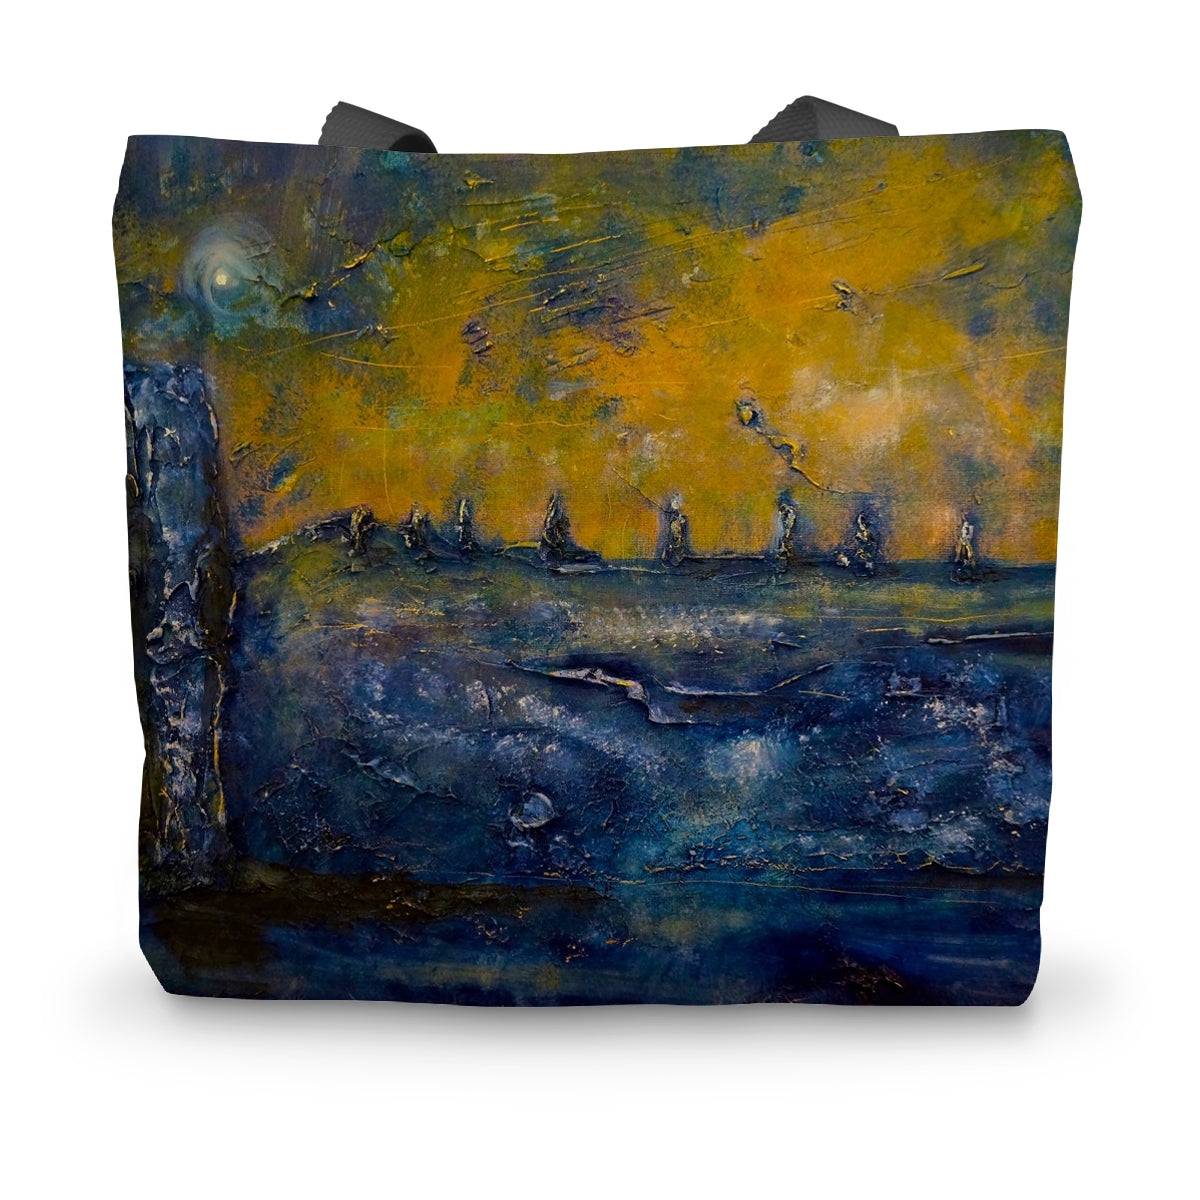 Brodgar Moonlight Orkney Art Gifts Canvas Tote Bag-Bags-Orkney Art Gallery-14"x18.5"-Paintings, Prints, Homeware, Art Gifts From Scotland By Scottish Artist Kevin Hunter